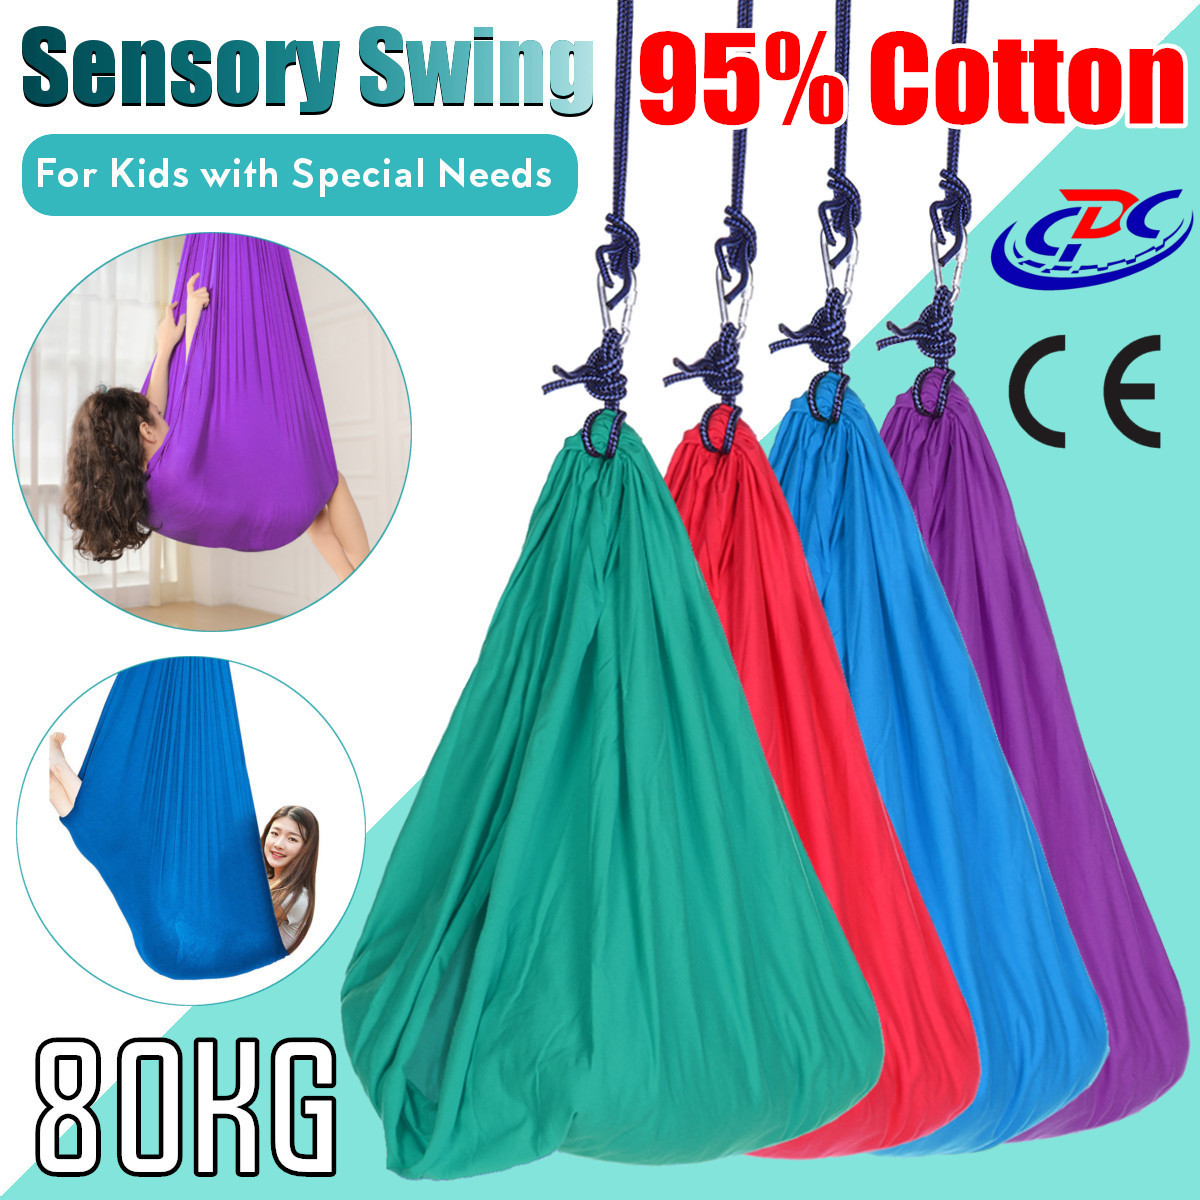 Kids Cotton Swing Hammock for Autism ADHD ADD Therapy Cuddle Up to 80kg Sensory Child Therapy Elastic Parcel Steady Seat Swing